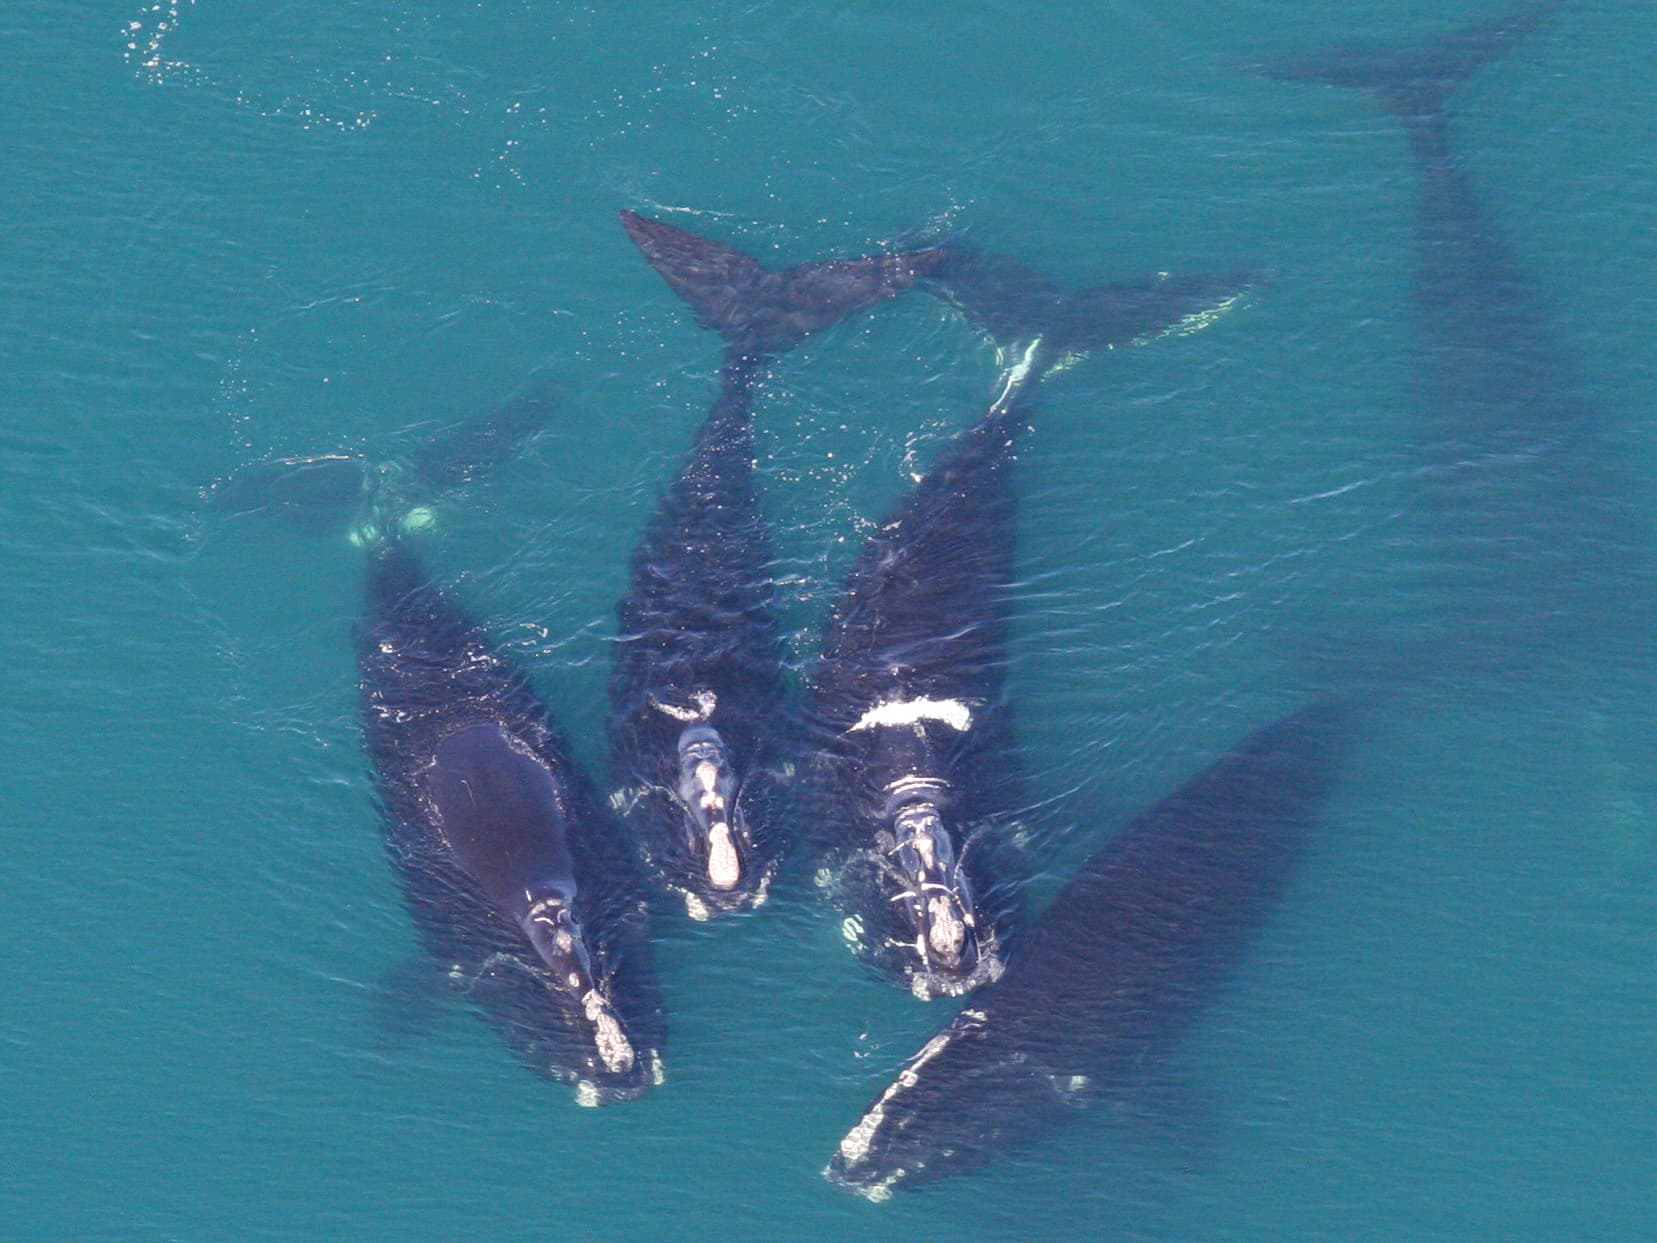 pod of right whales swimming near the surface of the water